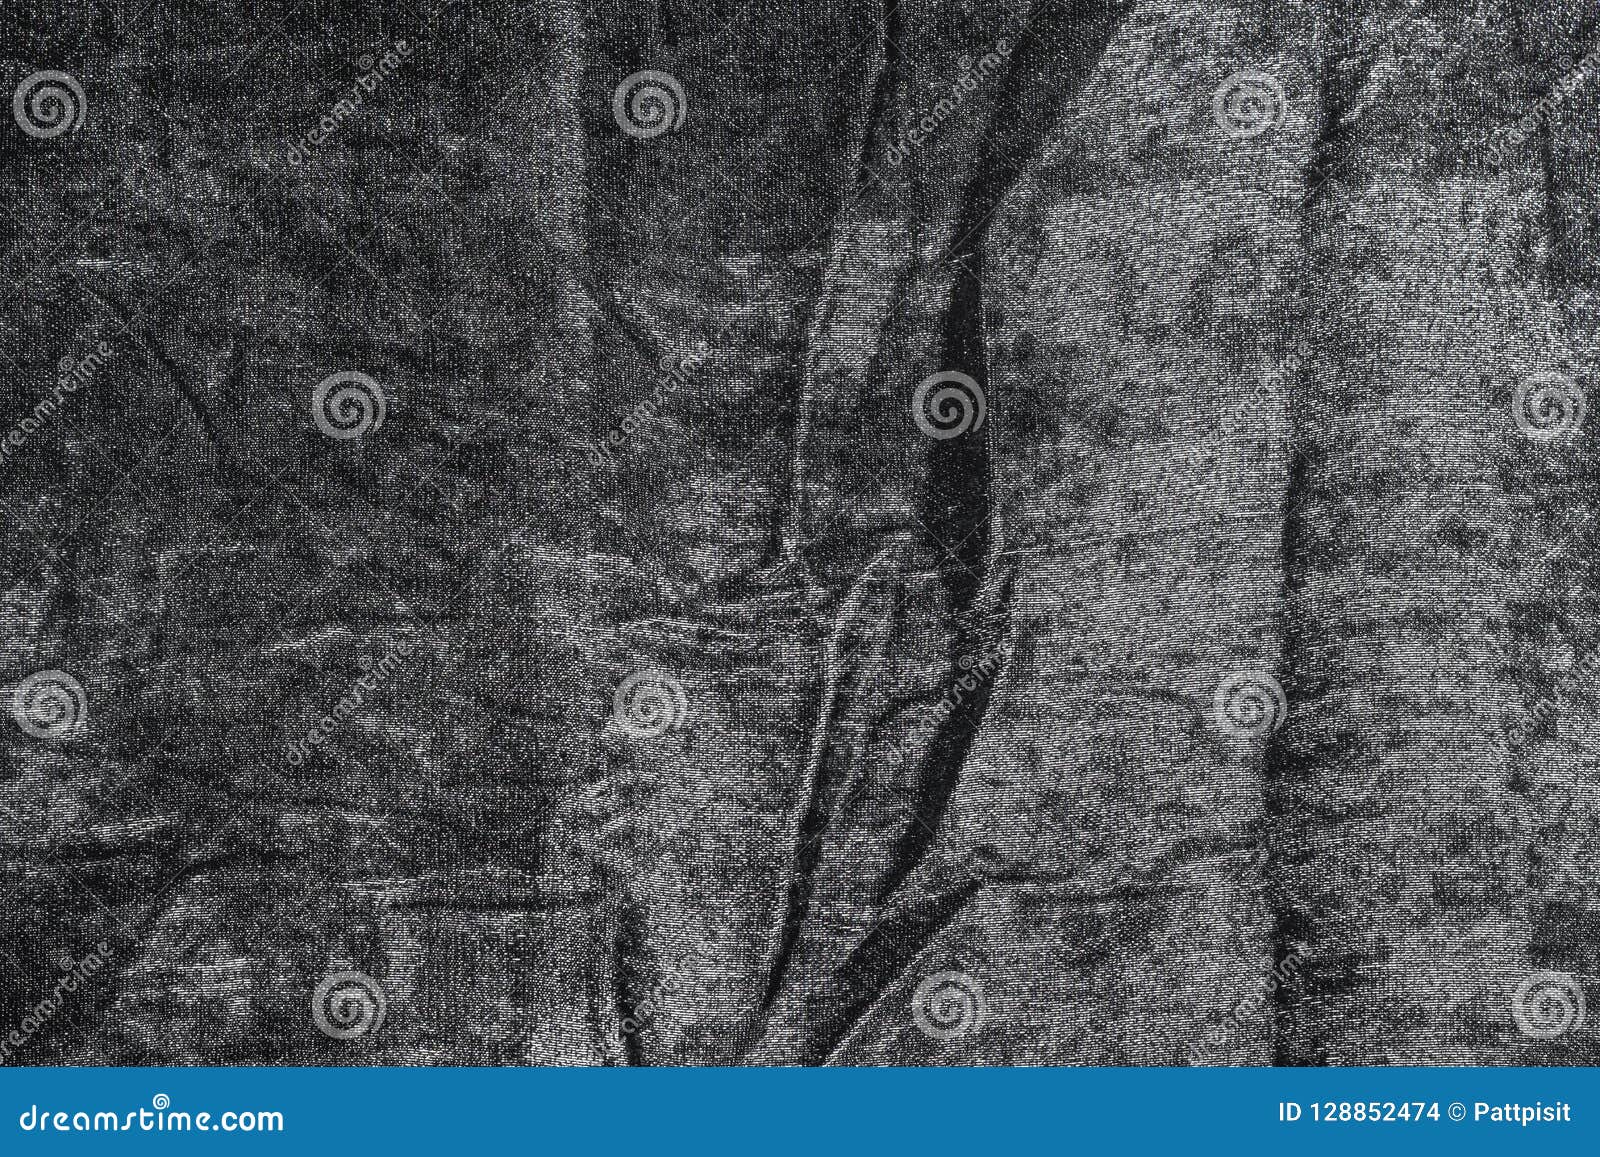 Wrinkled Grey Abstract Background Stock Photo - Image of cloth, black ...